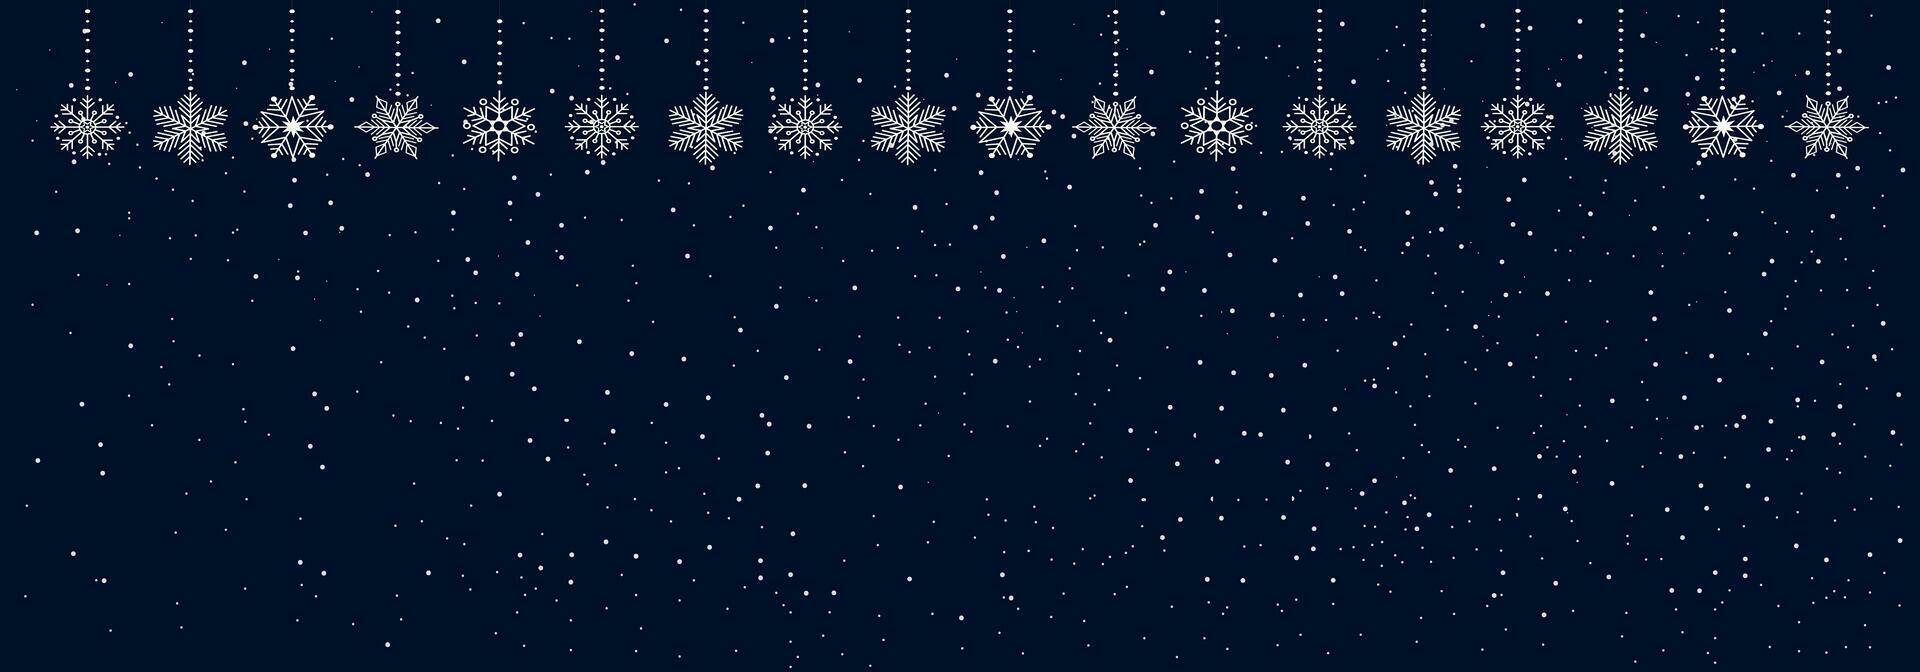 Winter blue sky with falling snow, snowflake. Holiday Winter background for Merry Christmas and Happy New Year. Vector illustration. Vector illustration